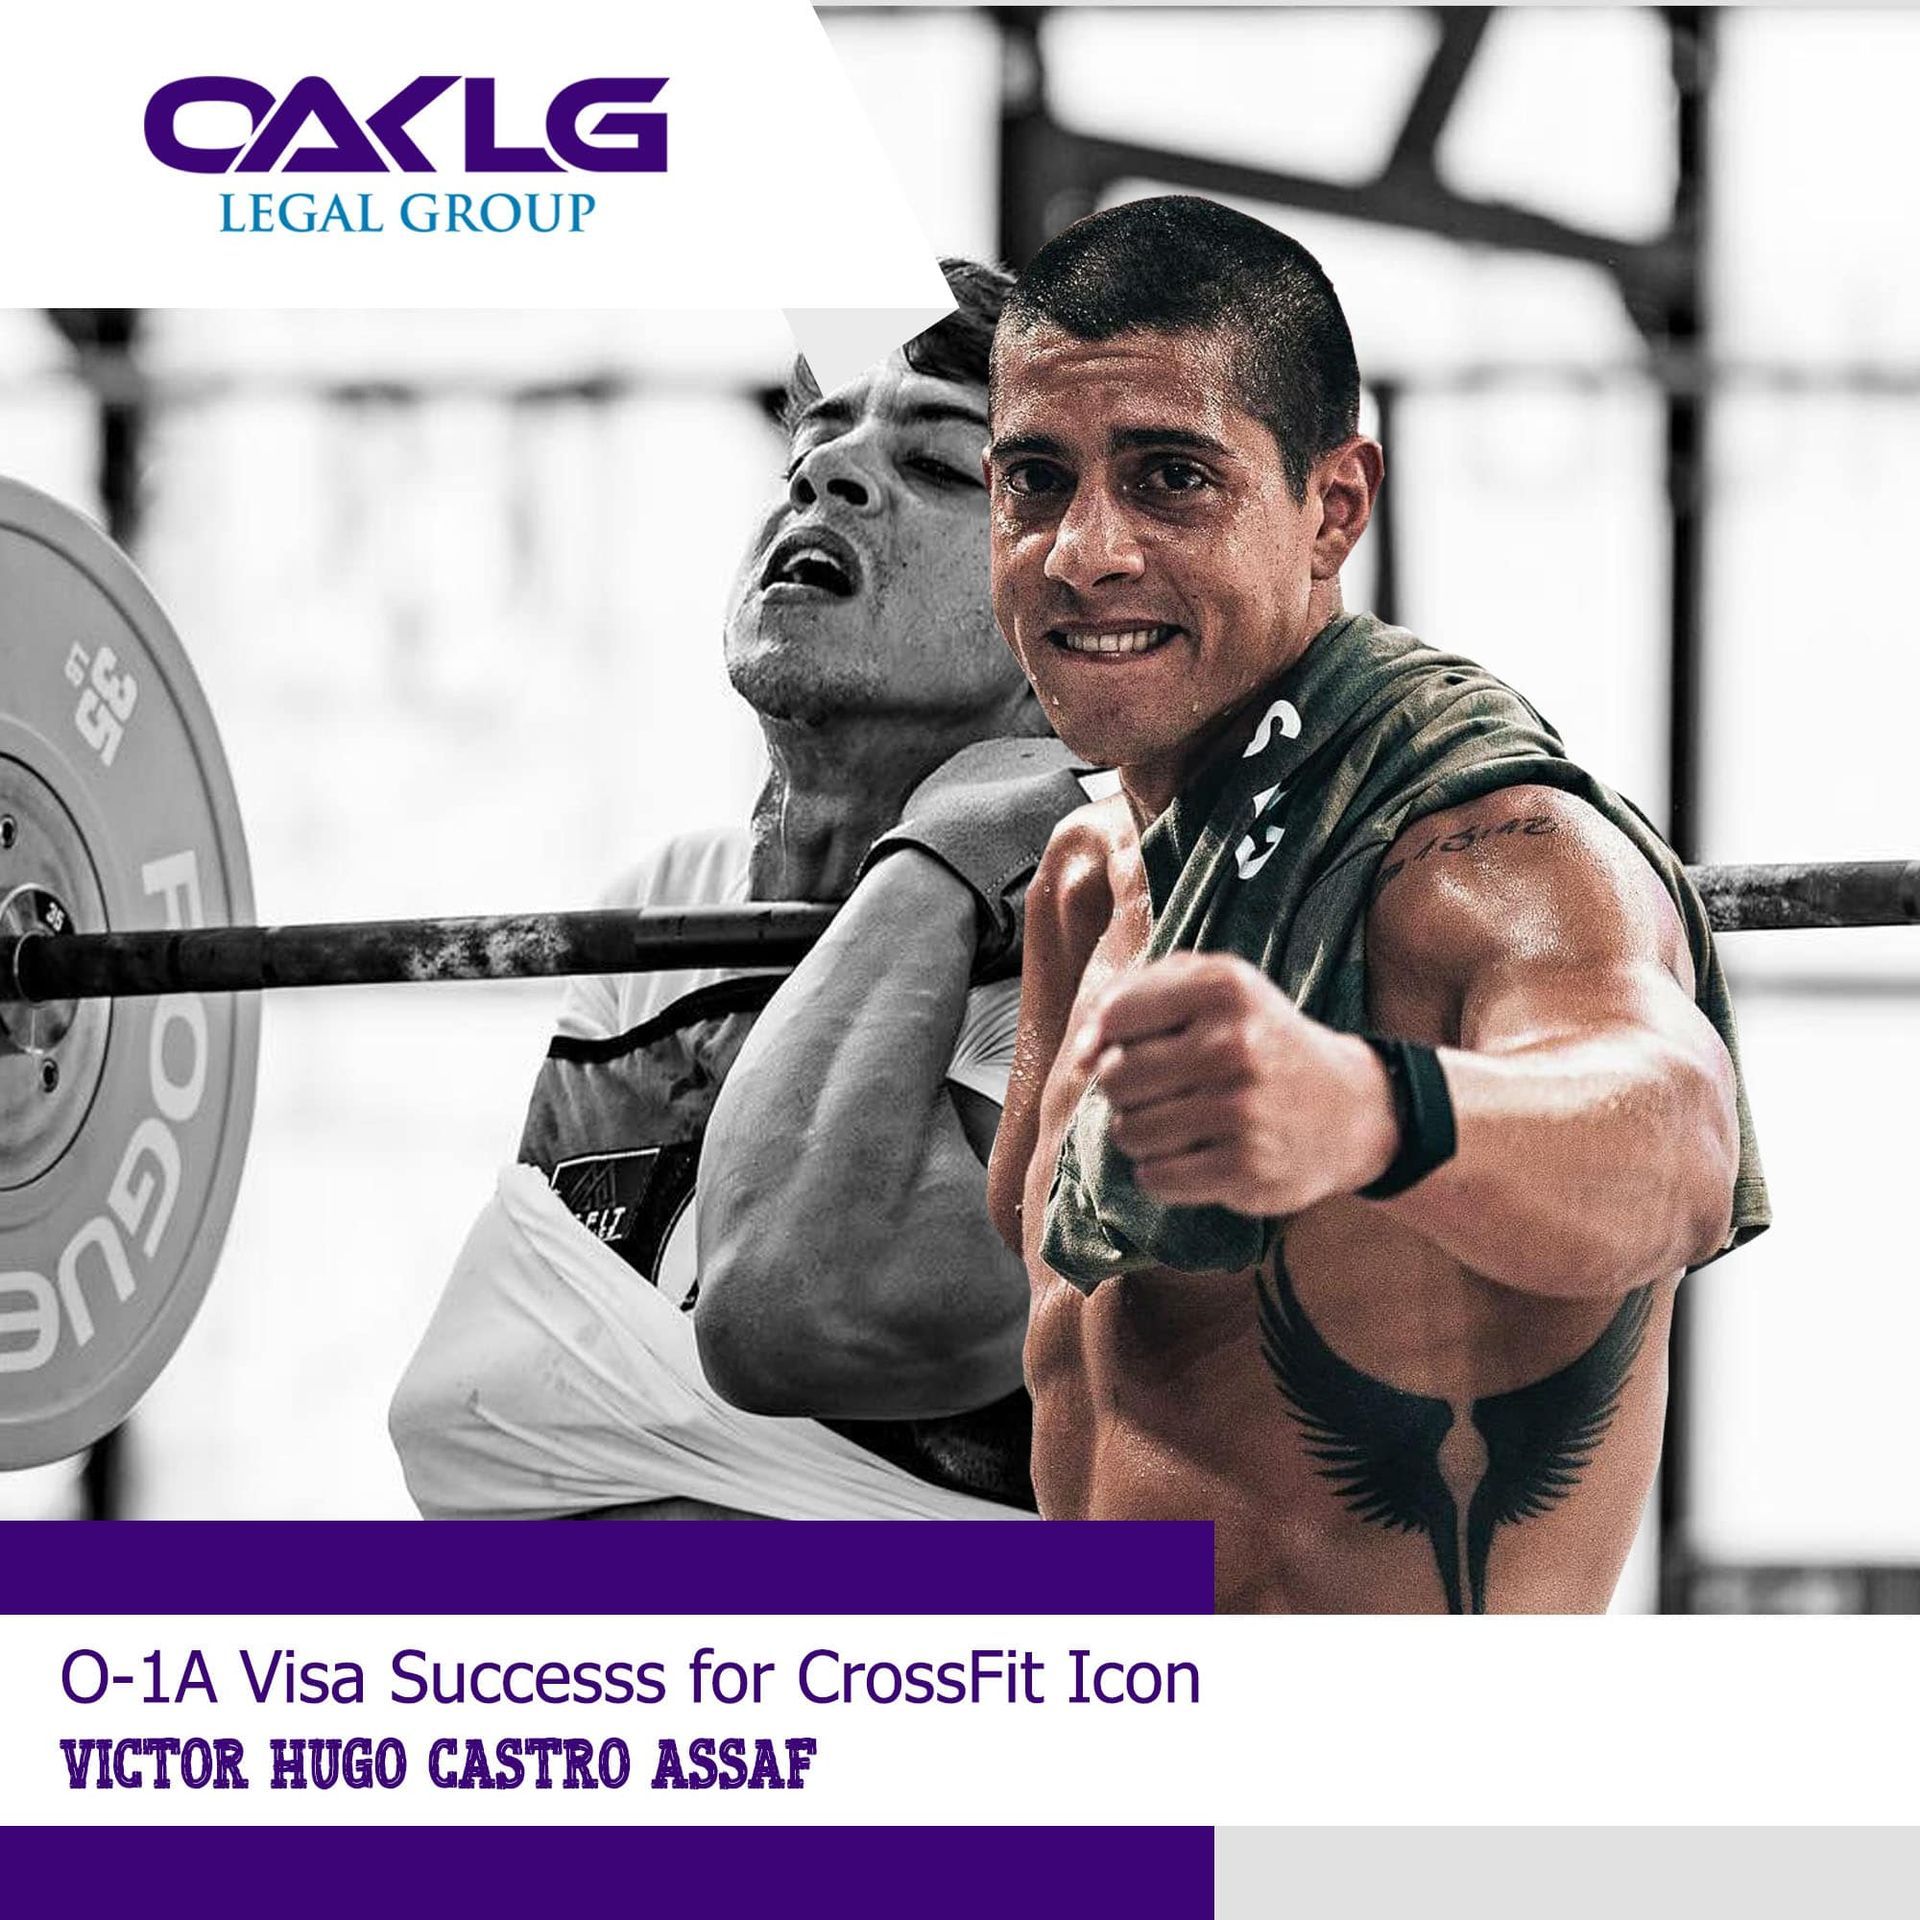 O-1A Visa Comparable Evidence Success for the CrossFit Icon Victor Hugo Castro Assaf